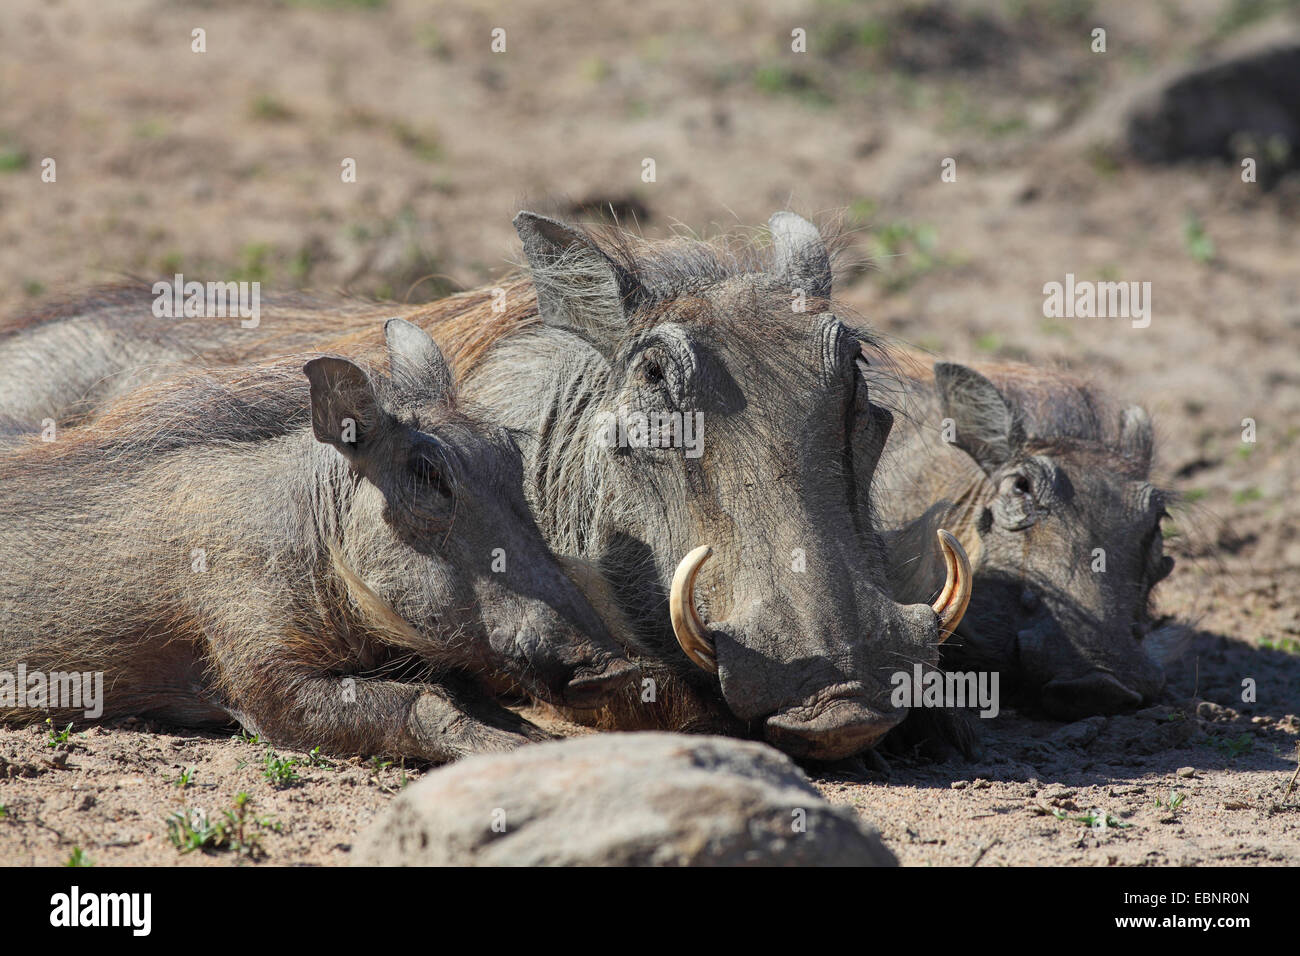 common warthog, savanna warthog (Phacochoerus africanus), female and two young warthogs lie on the belly, South Africa, Umfolozi Game Reserve Stock Photo